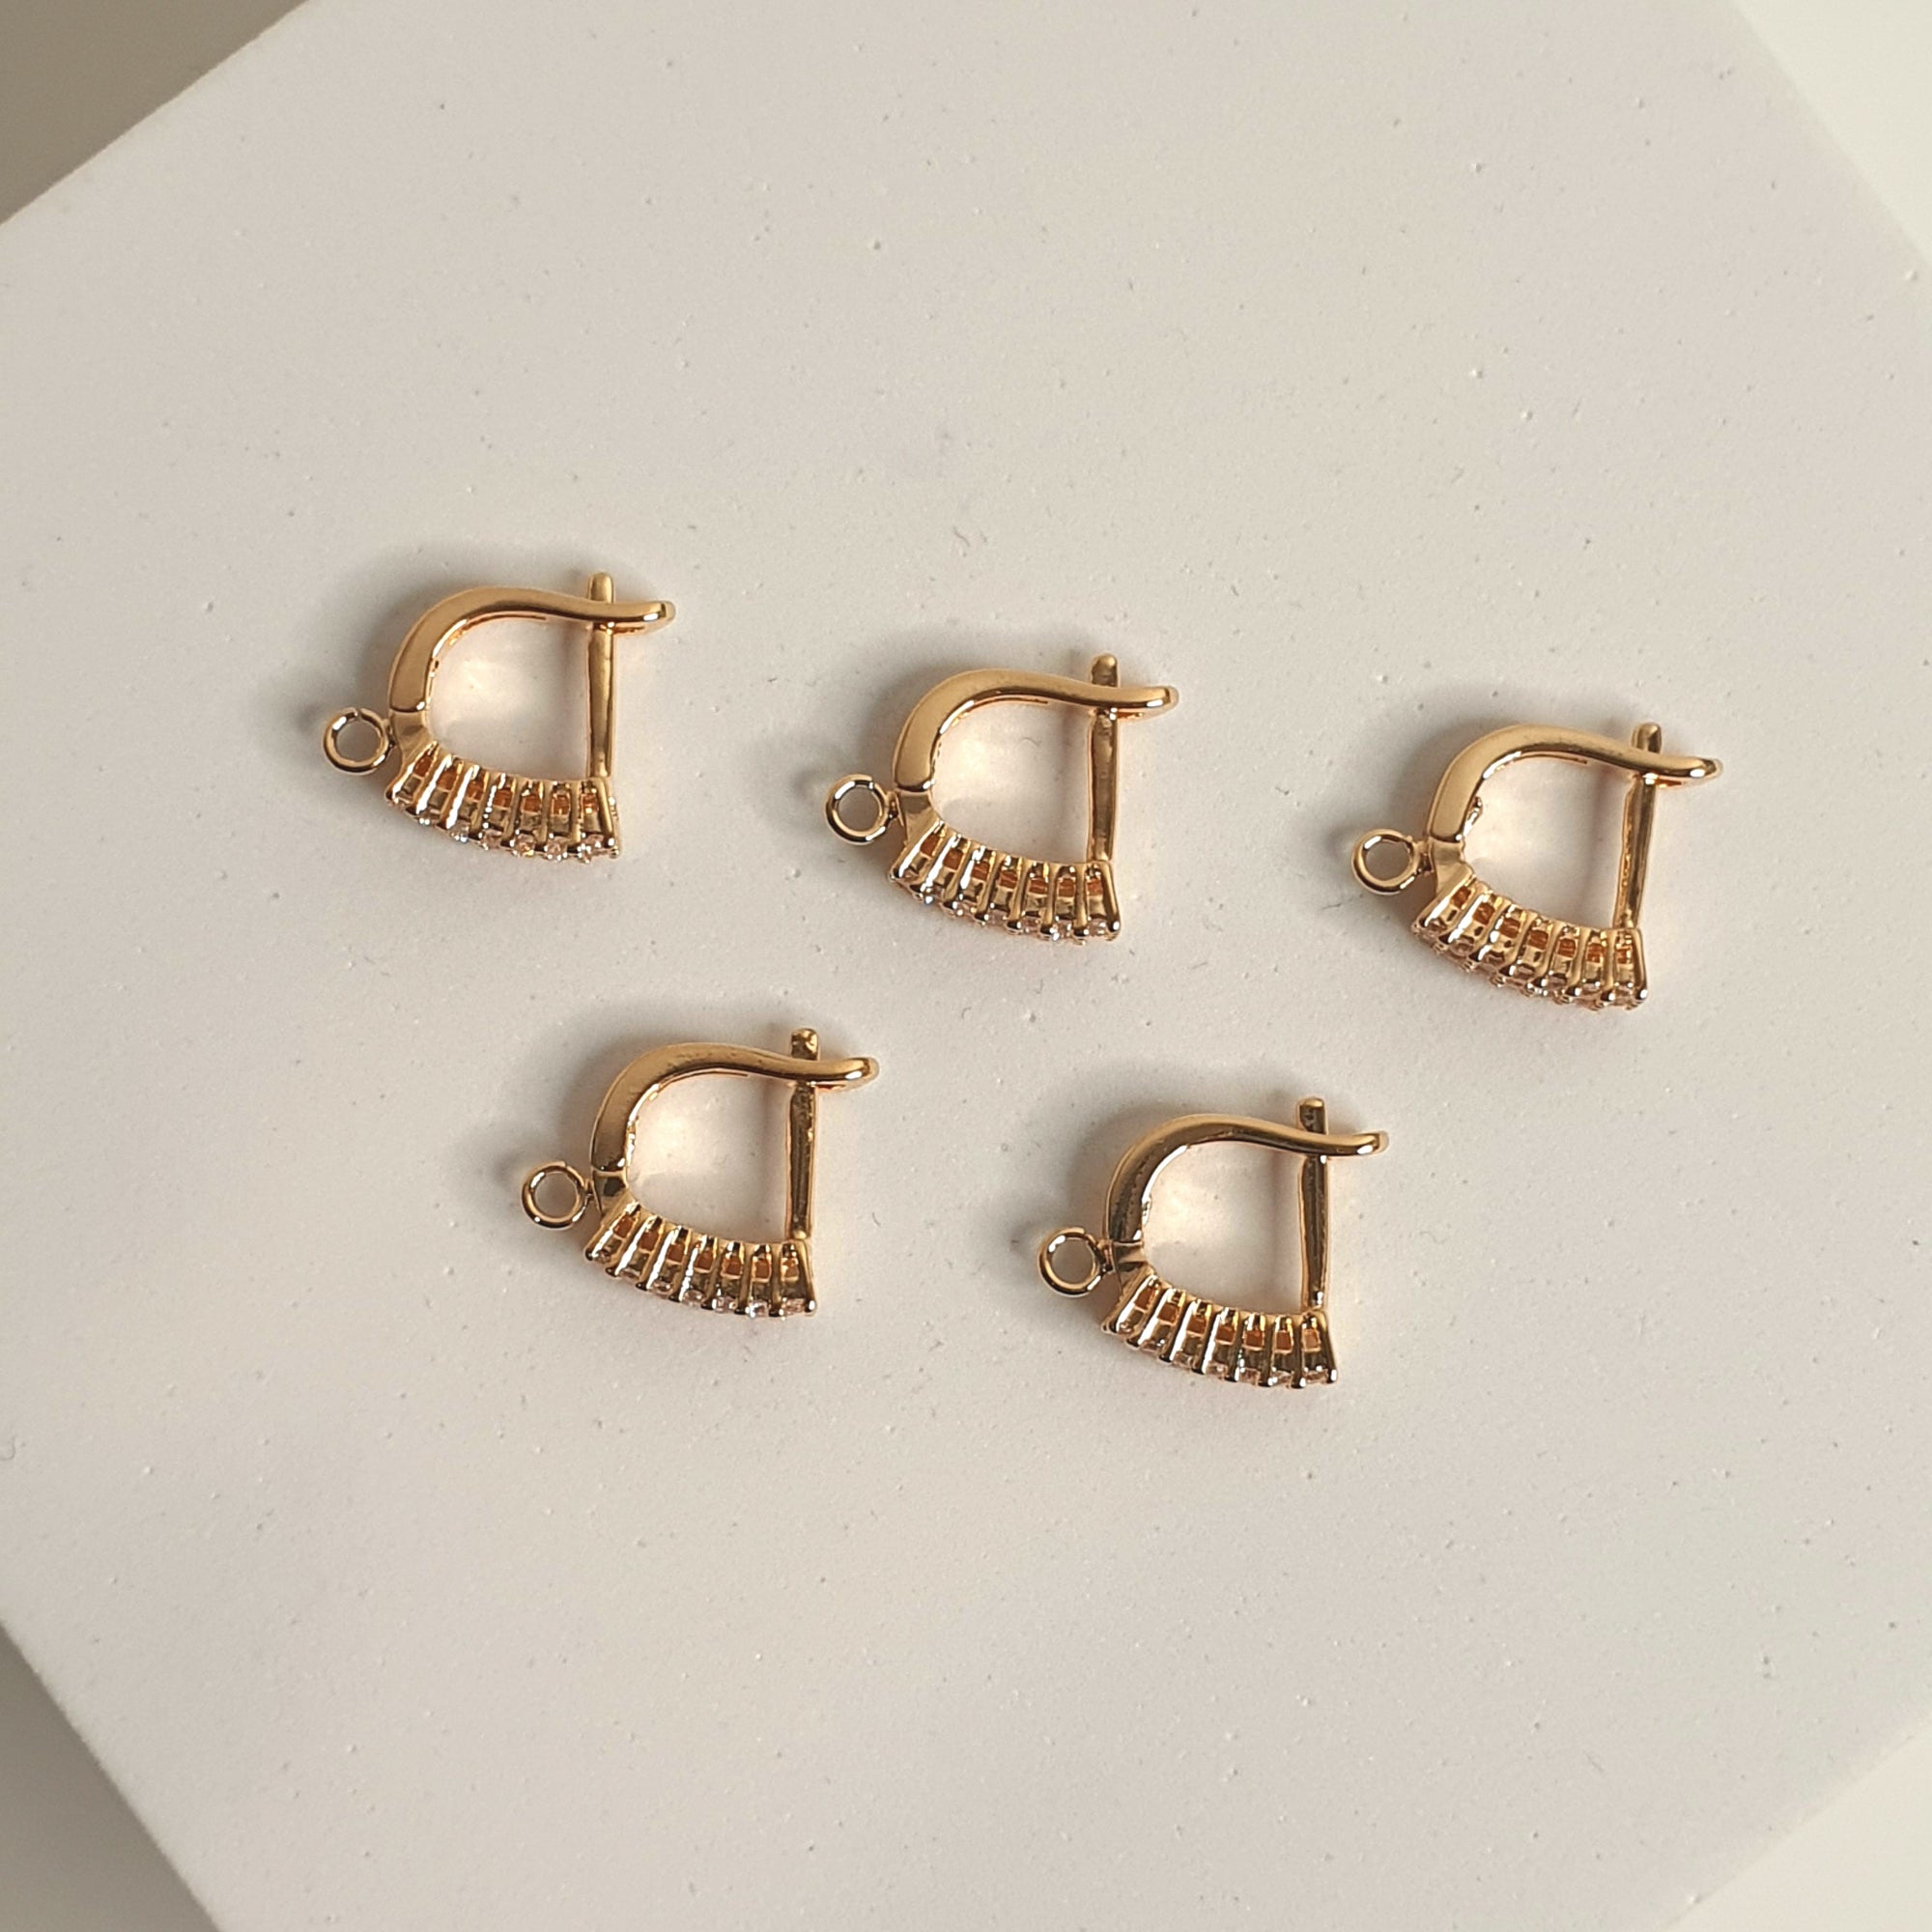 18k Gold Plated Earring Hoops - Harps - Set of 10